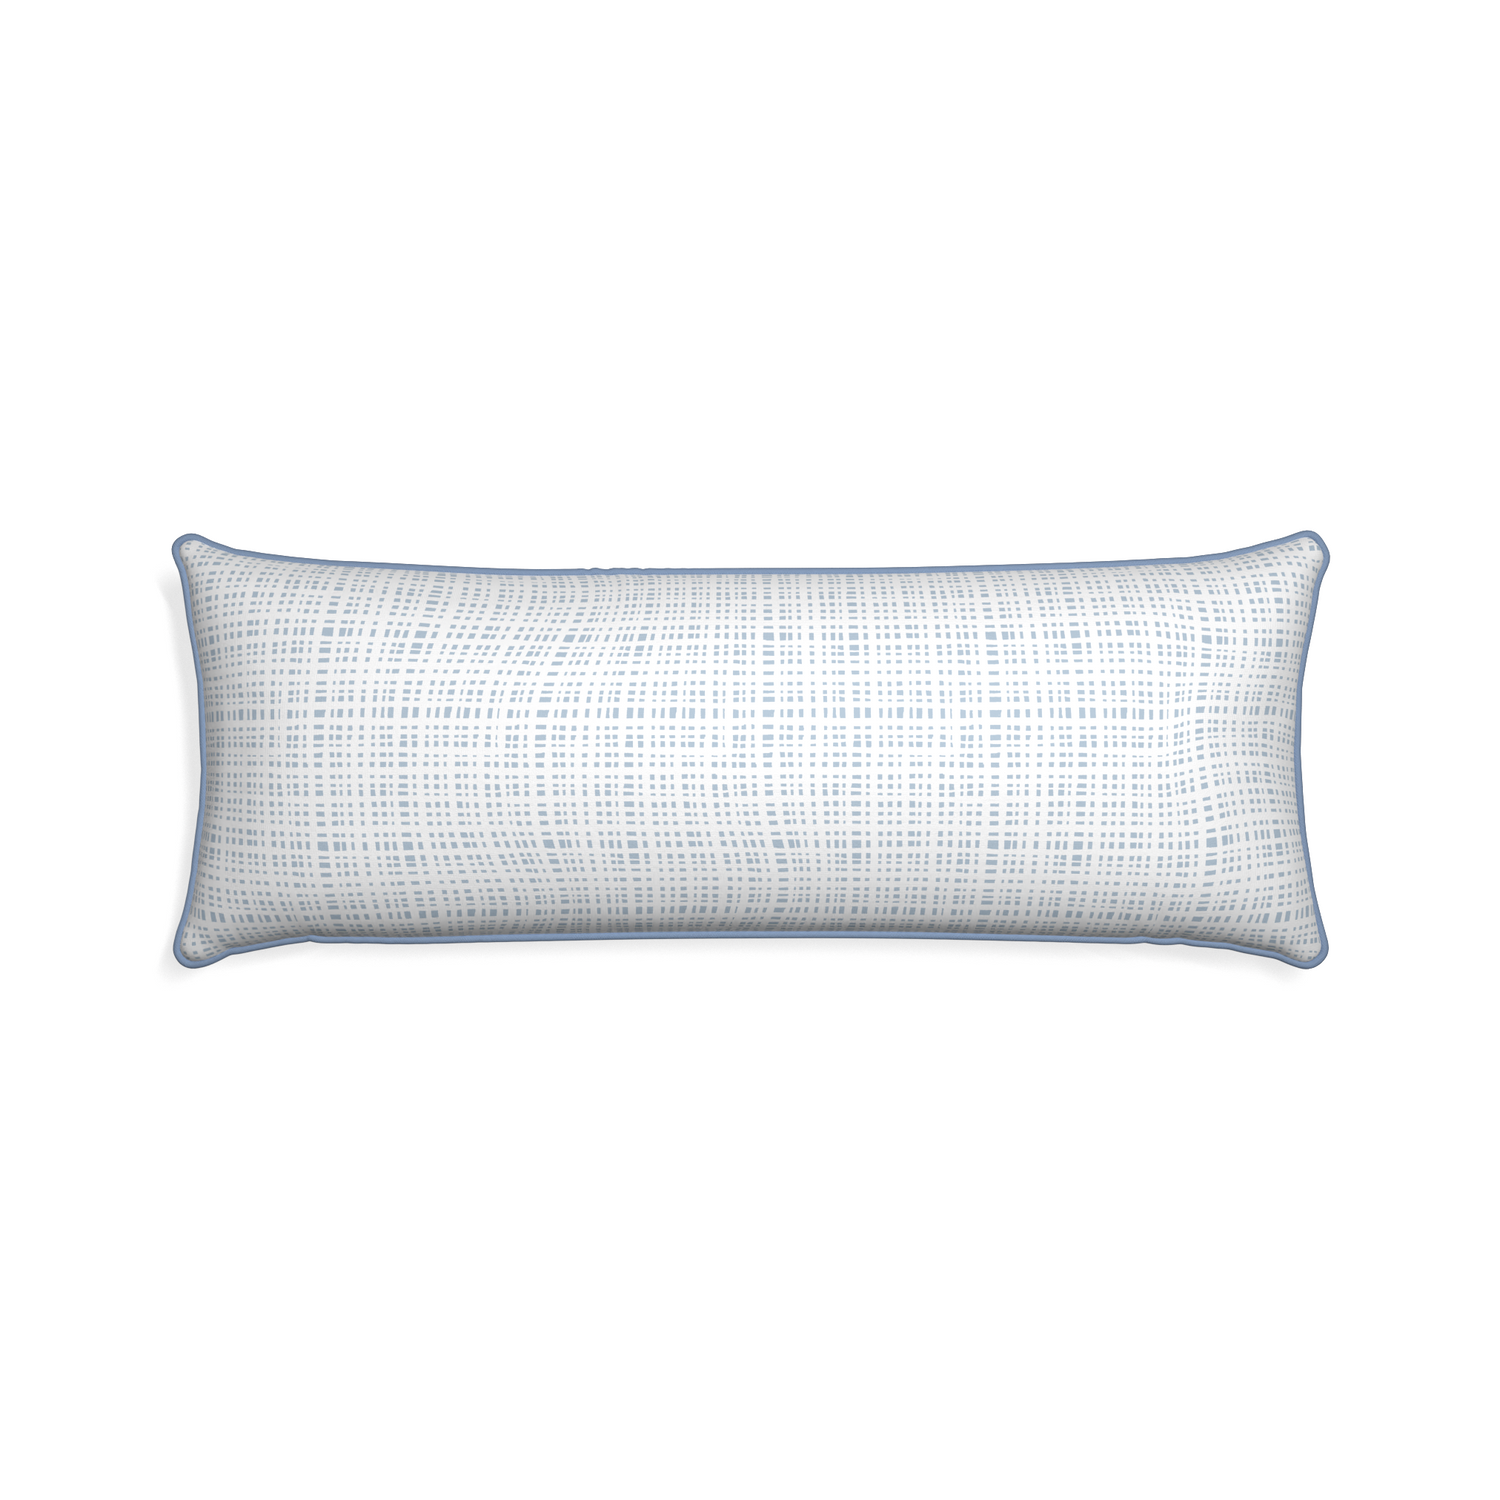 Xl-lumbar ginger custom plaid sky bluepillow with sky piping on white background